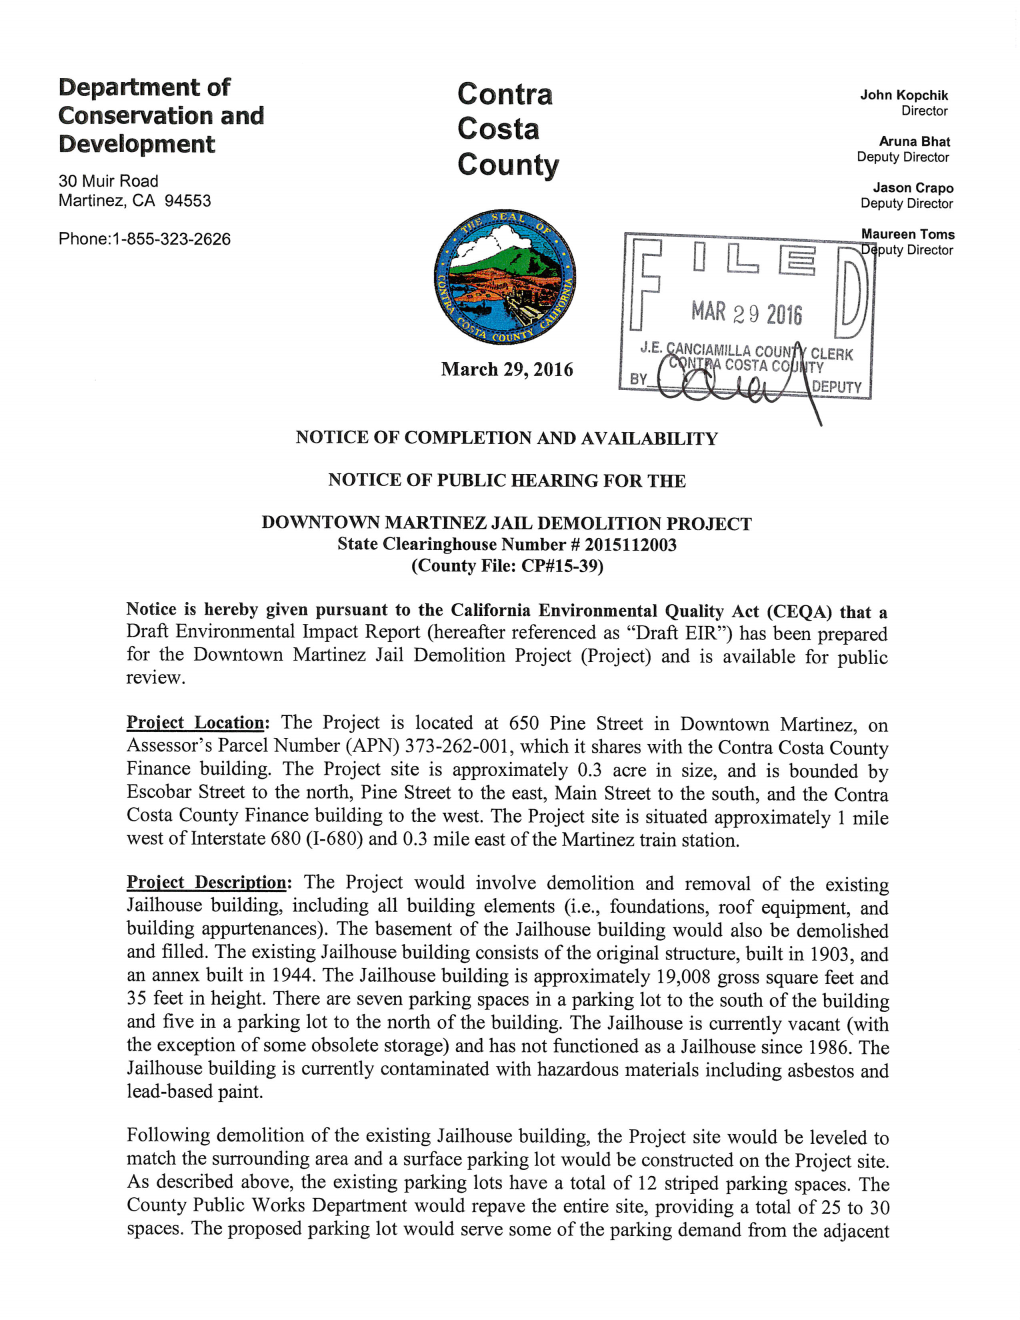 Environmental Impact Report for the Downtown Martinez Jail Demolition Project